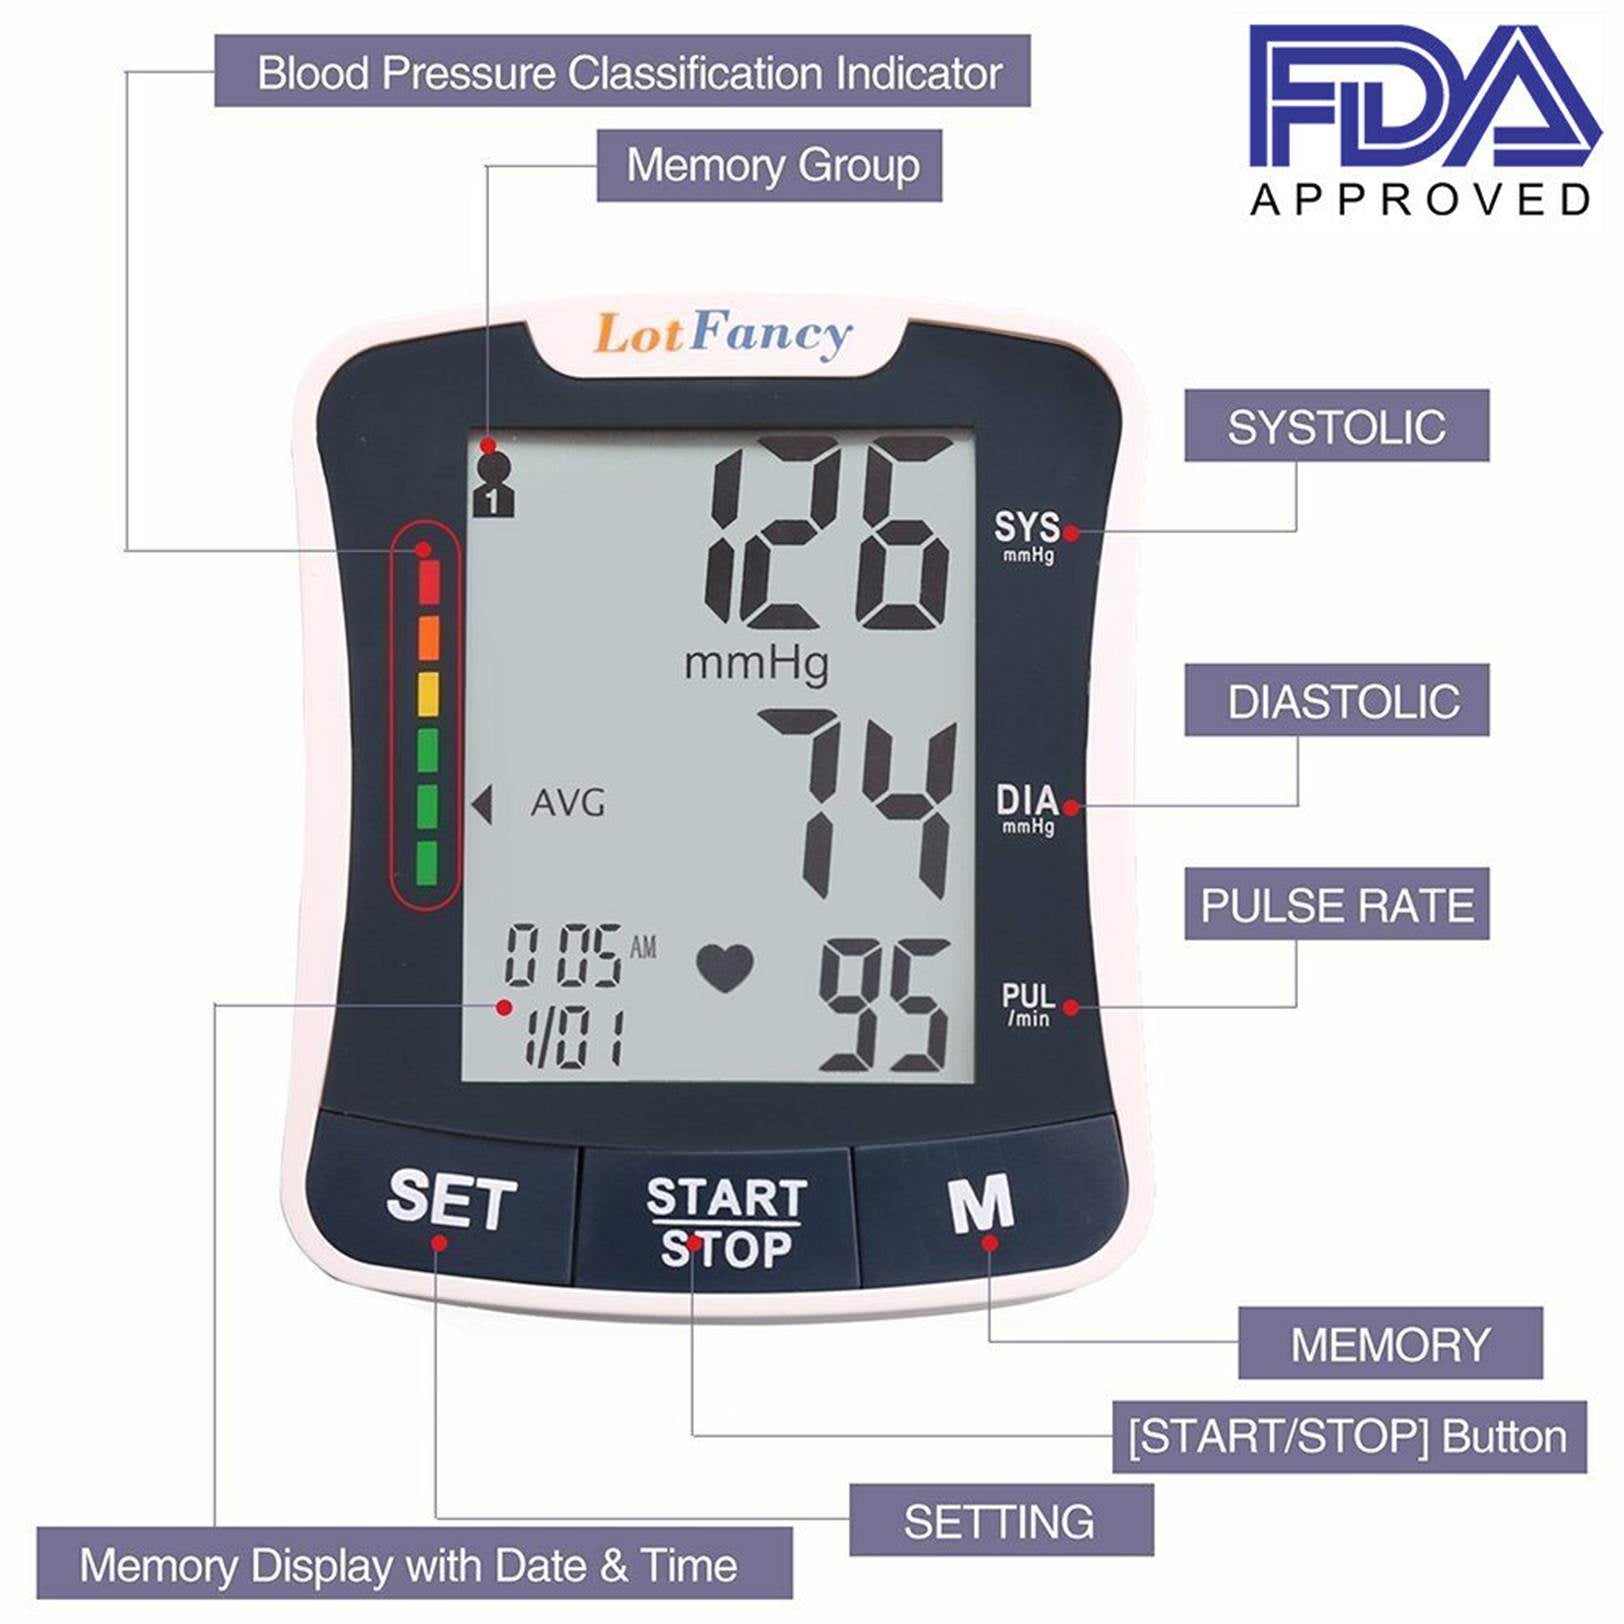 automatic blood pressure monitor is designed to fit any wrists between 5 and 8 inches in circumference. The flexible cuff means you can put it on your wrist and do your bp measurements at home